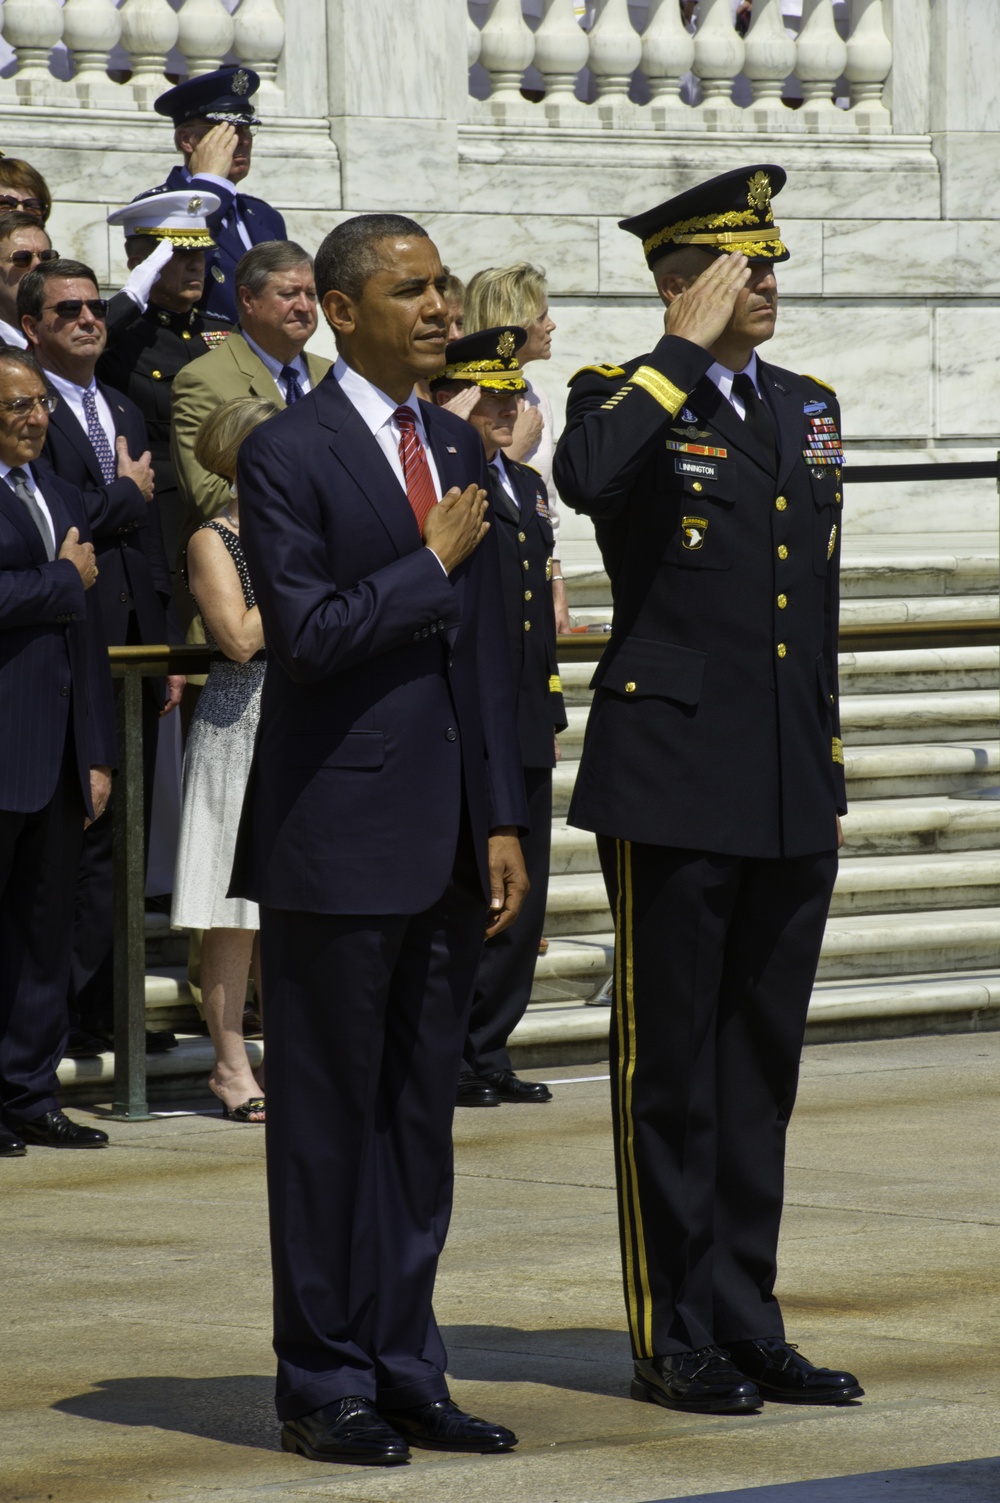 Presidential wreath laying at Tomb of the Unknowns